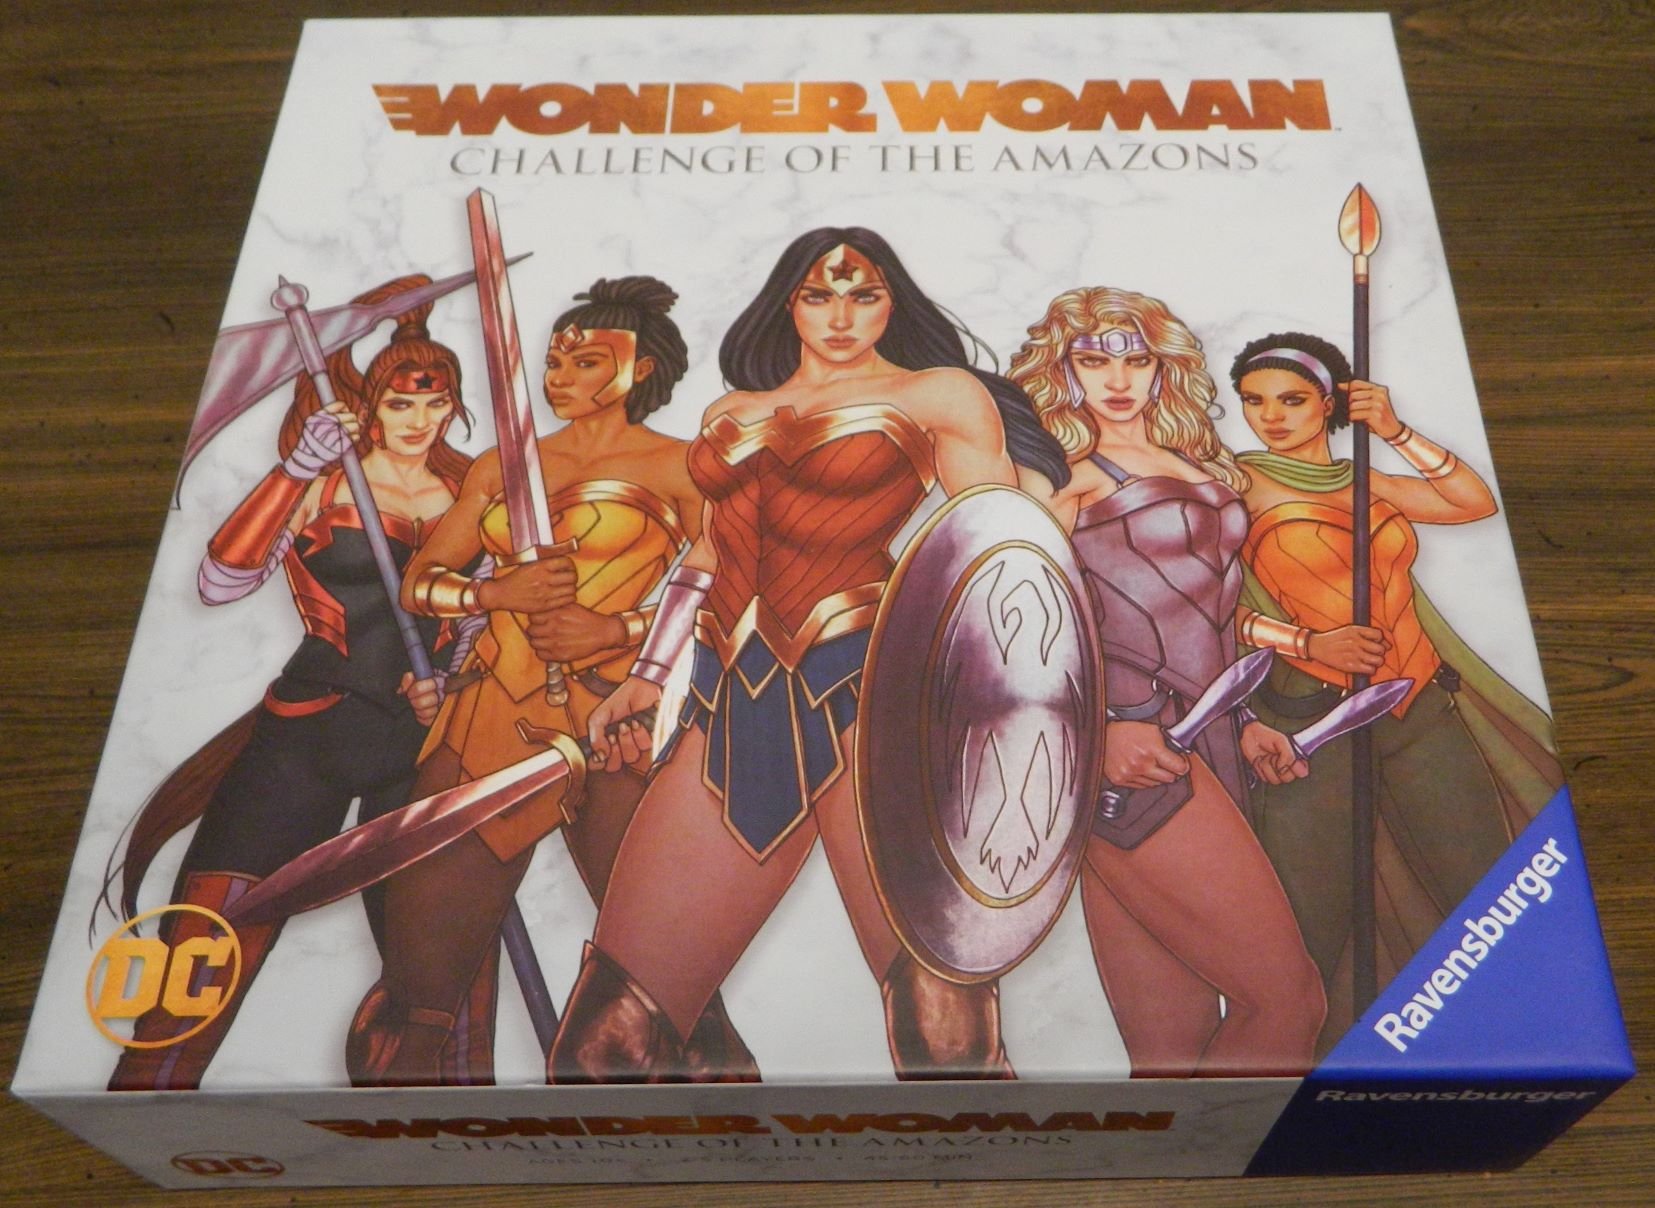 How to Play Wonder Woman: Challenge of the Amazons Rules and Instructions